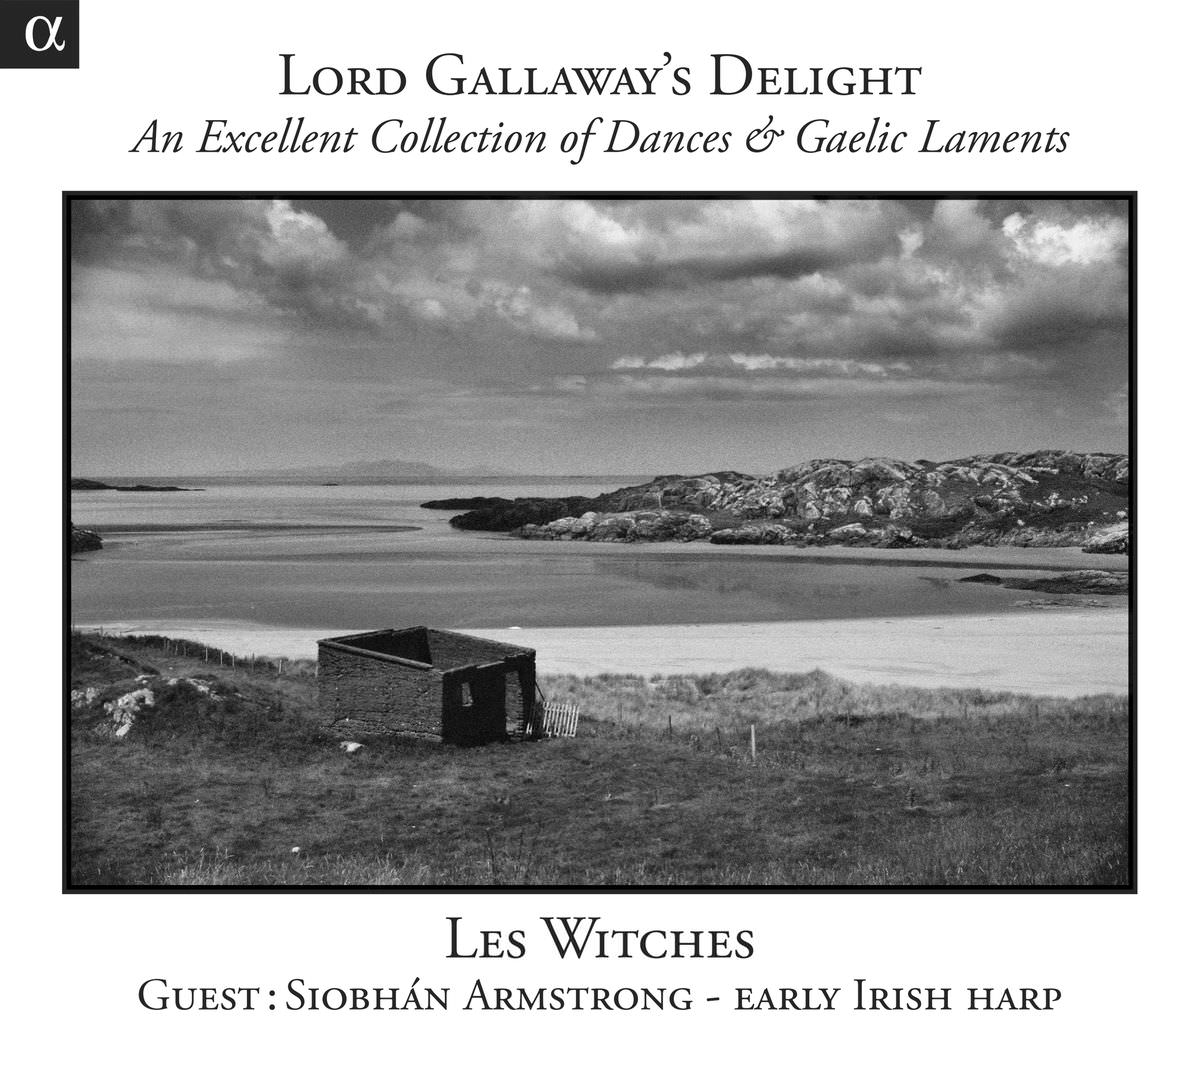 Les Witches & Siobhan Armstrong – Lord Gallaway’s Delight: An Excellent Collection of Dances & Gaelic Laments (2013) [FLAC 24bit/96kHz]